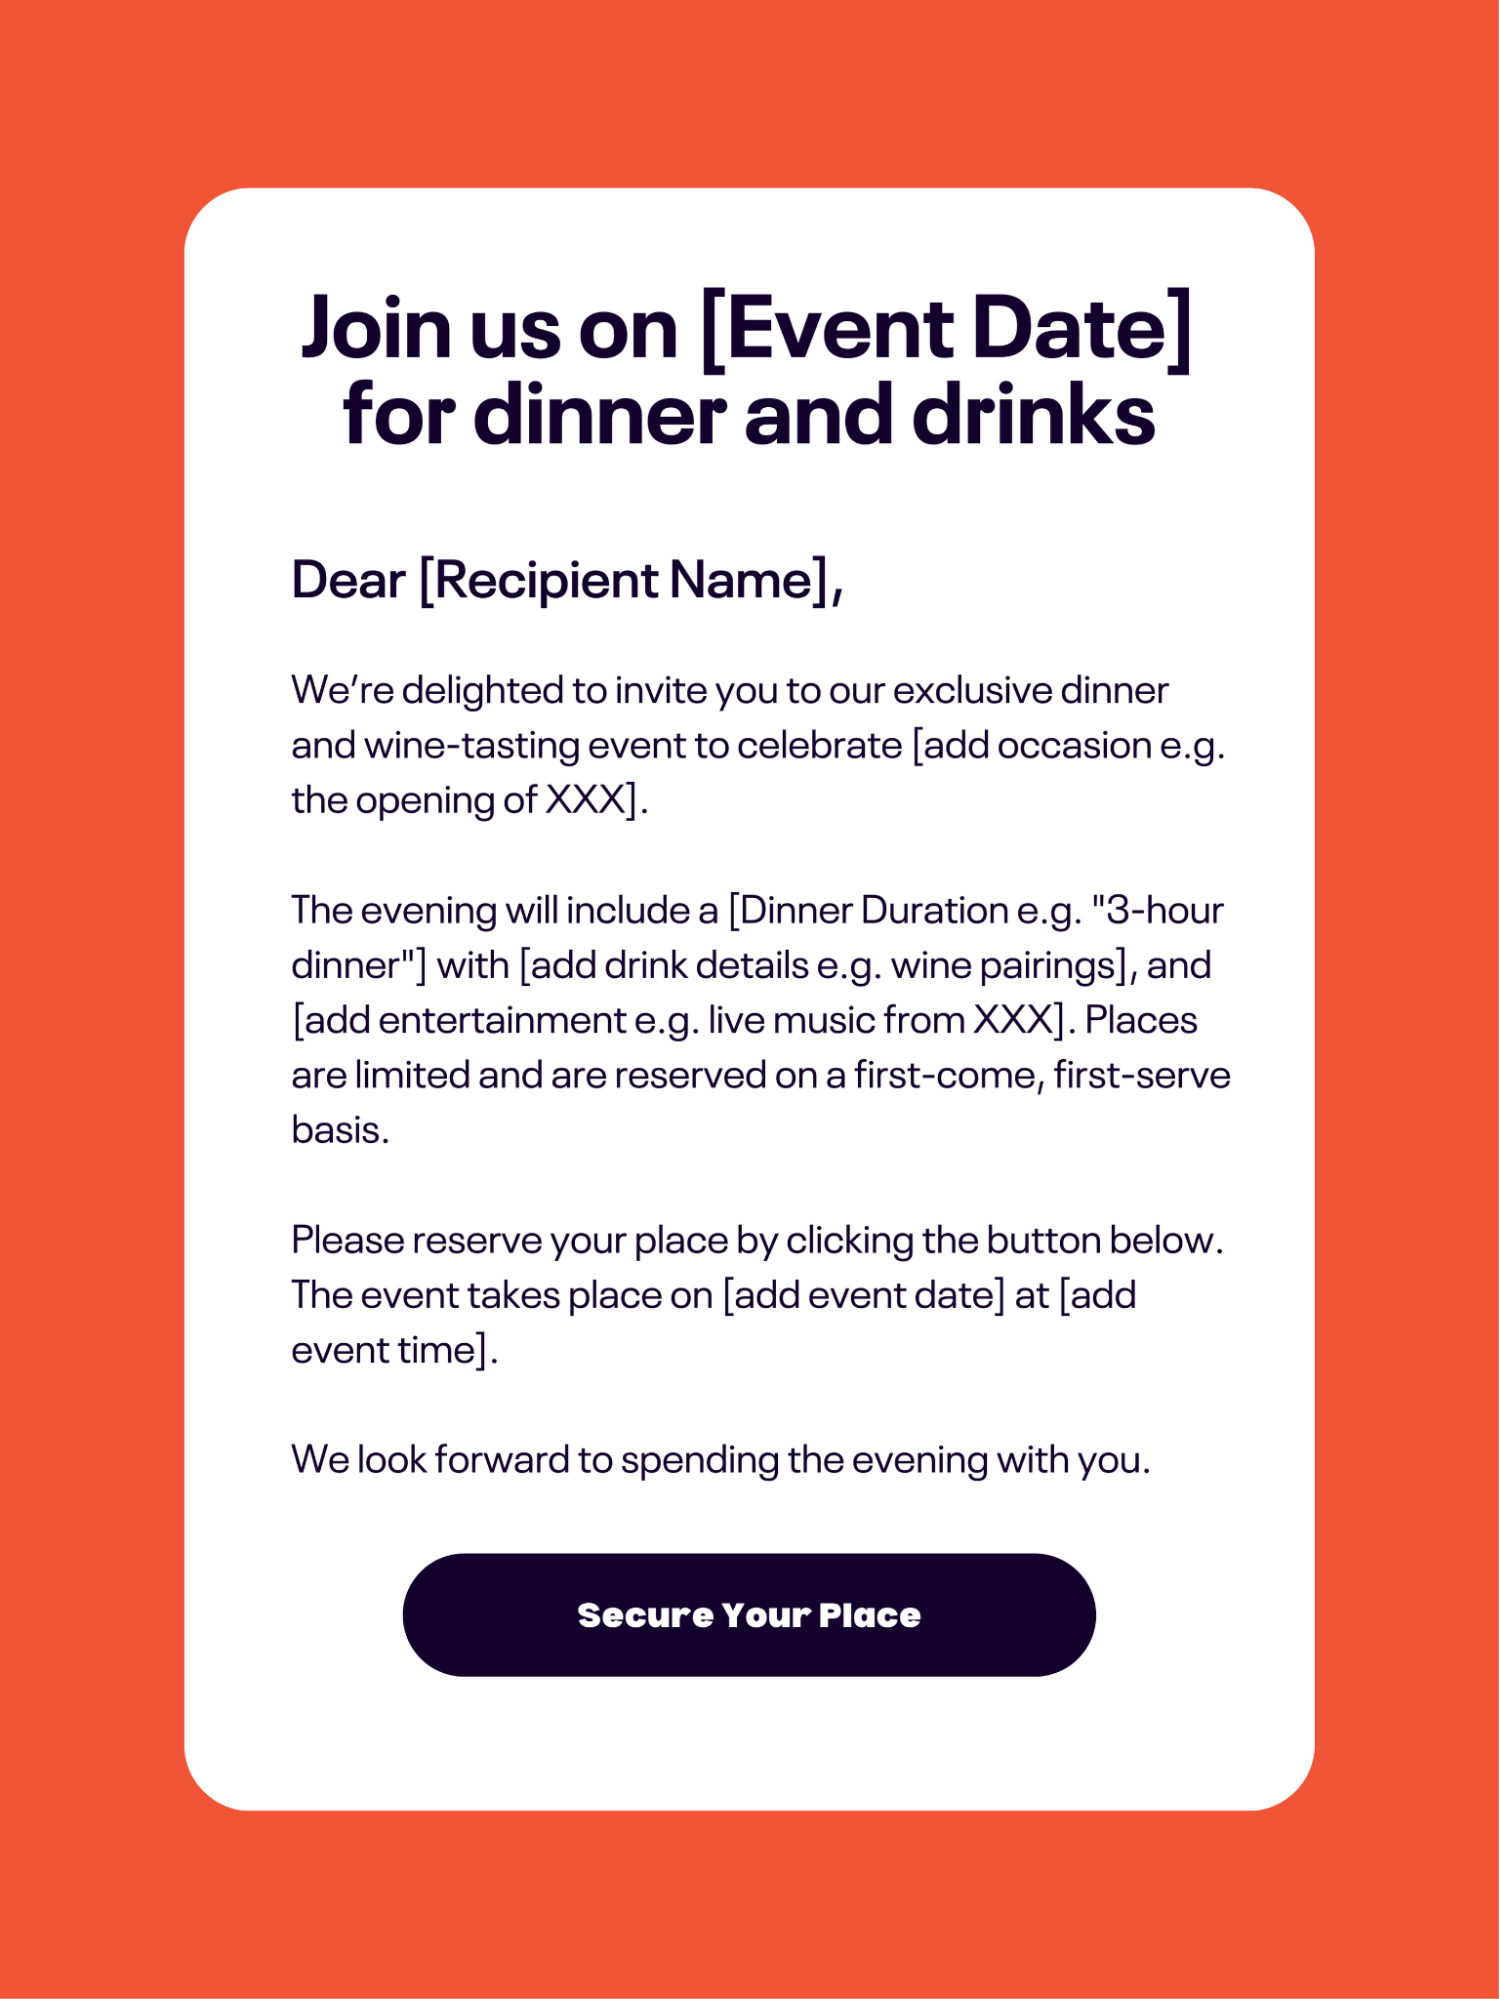 Template with formal invitation email text